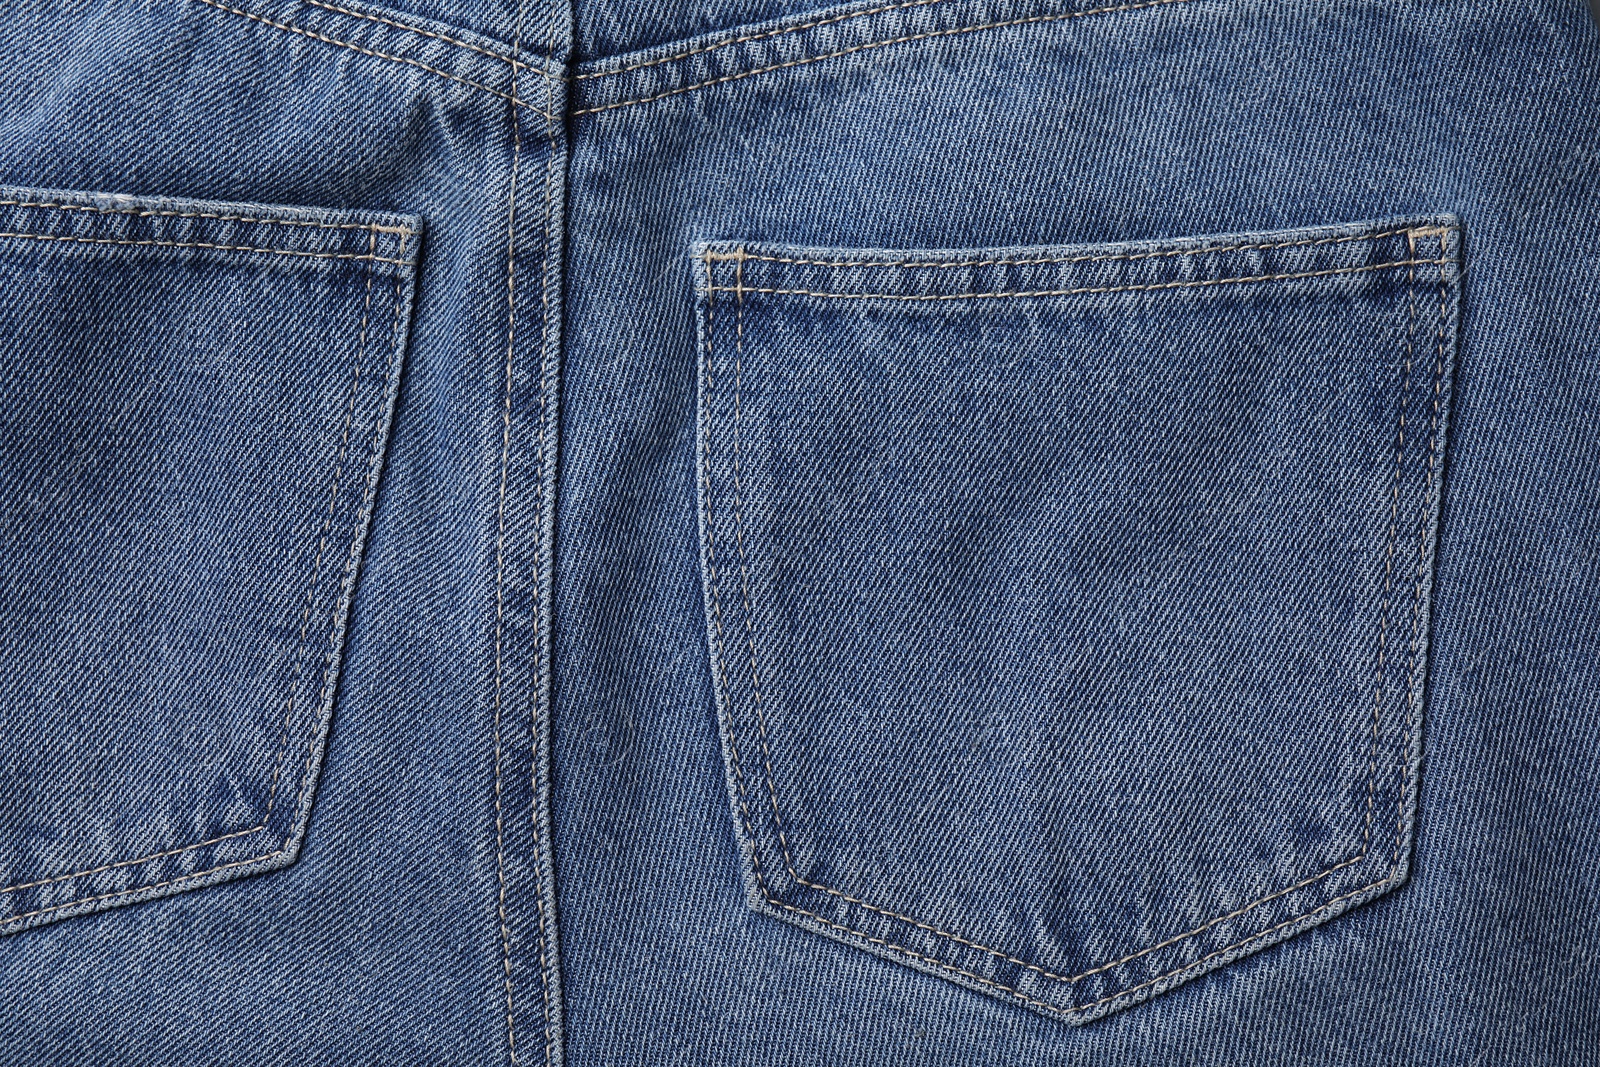 Photo of Jeans with pockets as background, top view